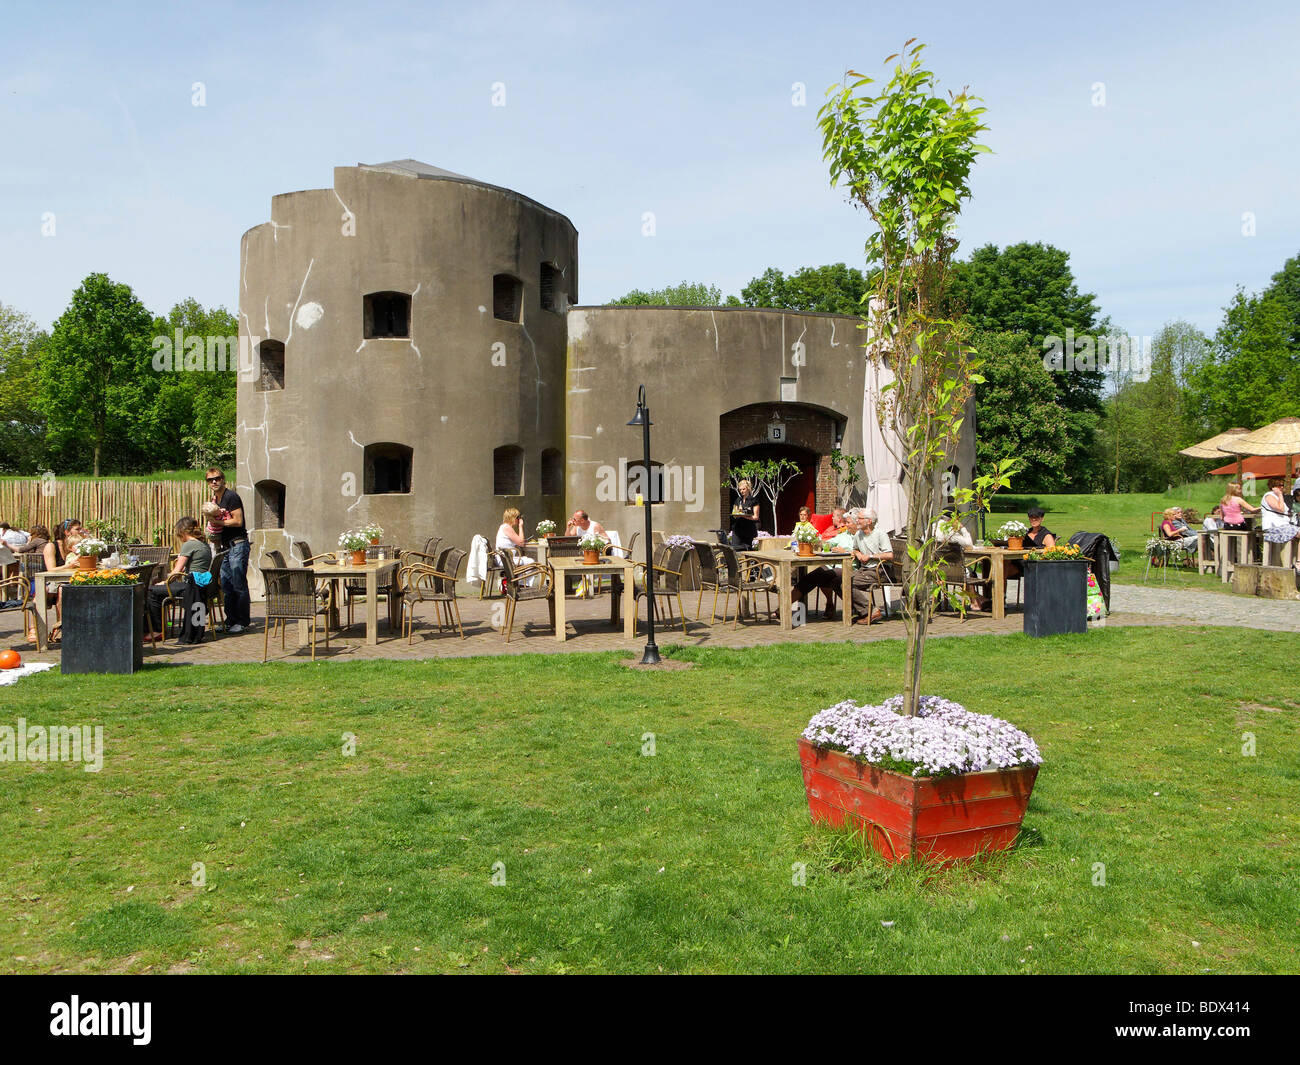 Fort aan de Klop, today used as a hotel, camp ground and café, Utrecht, Holland, Netherlands, Europe Stock Photo